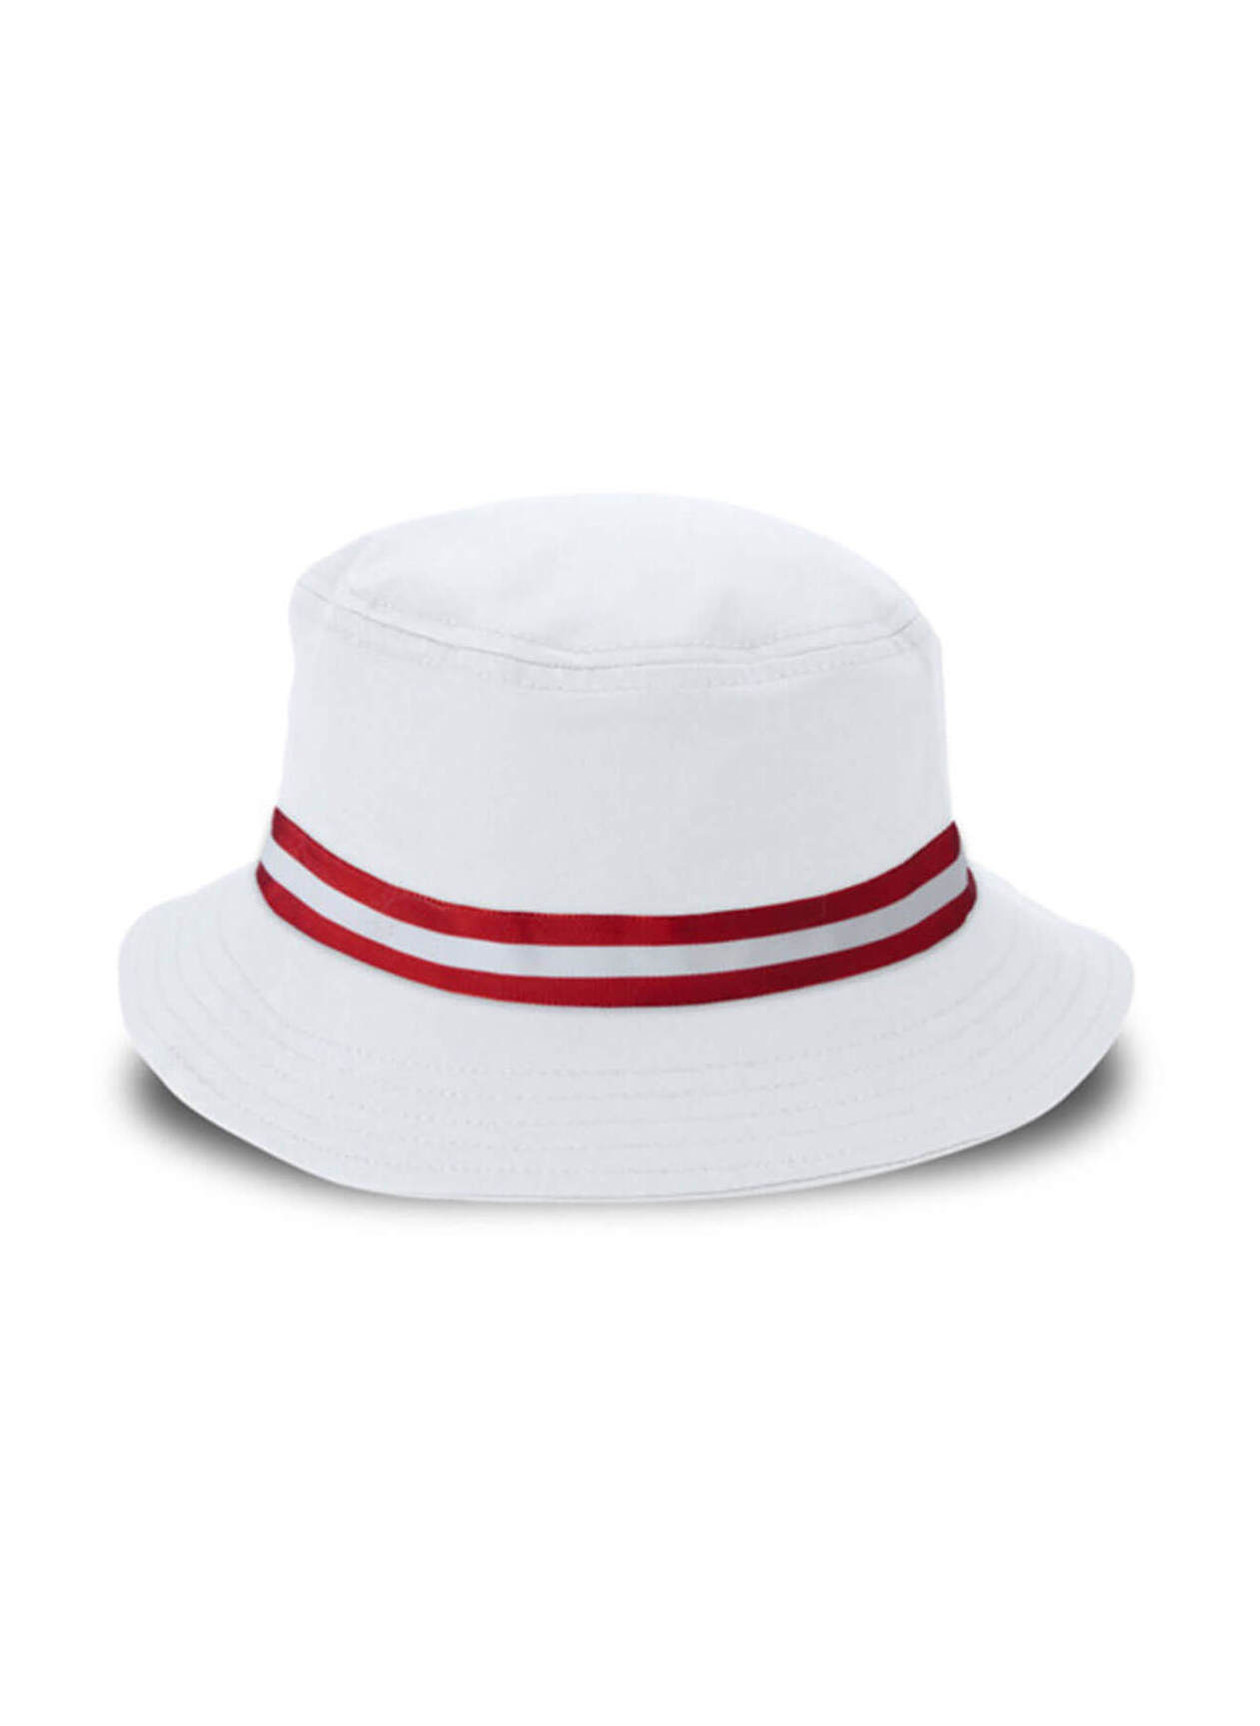 Imperial White / Red The Oxford Bucket Hat